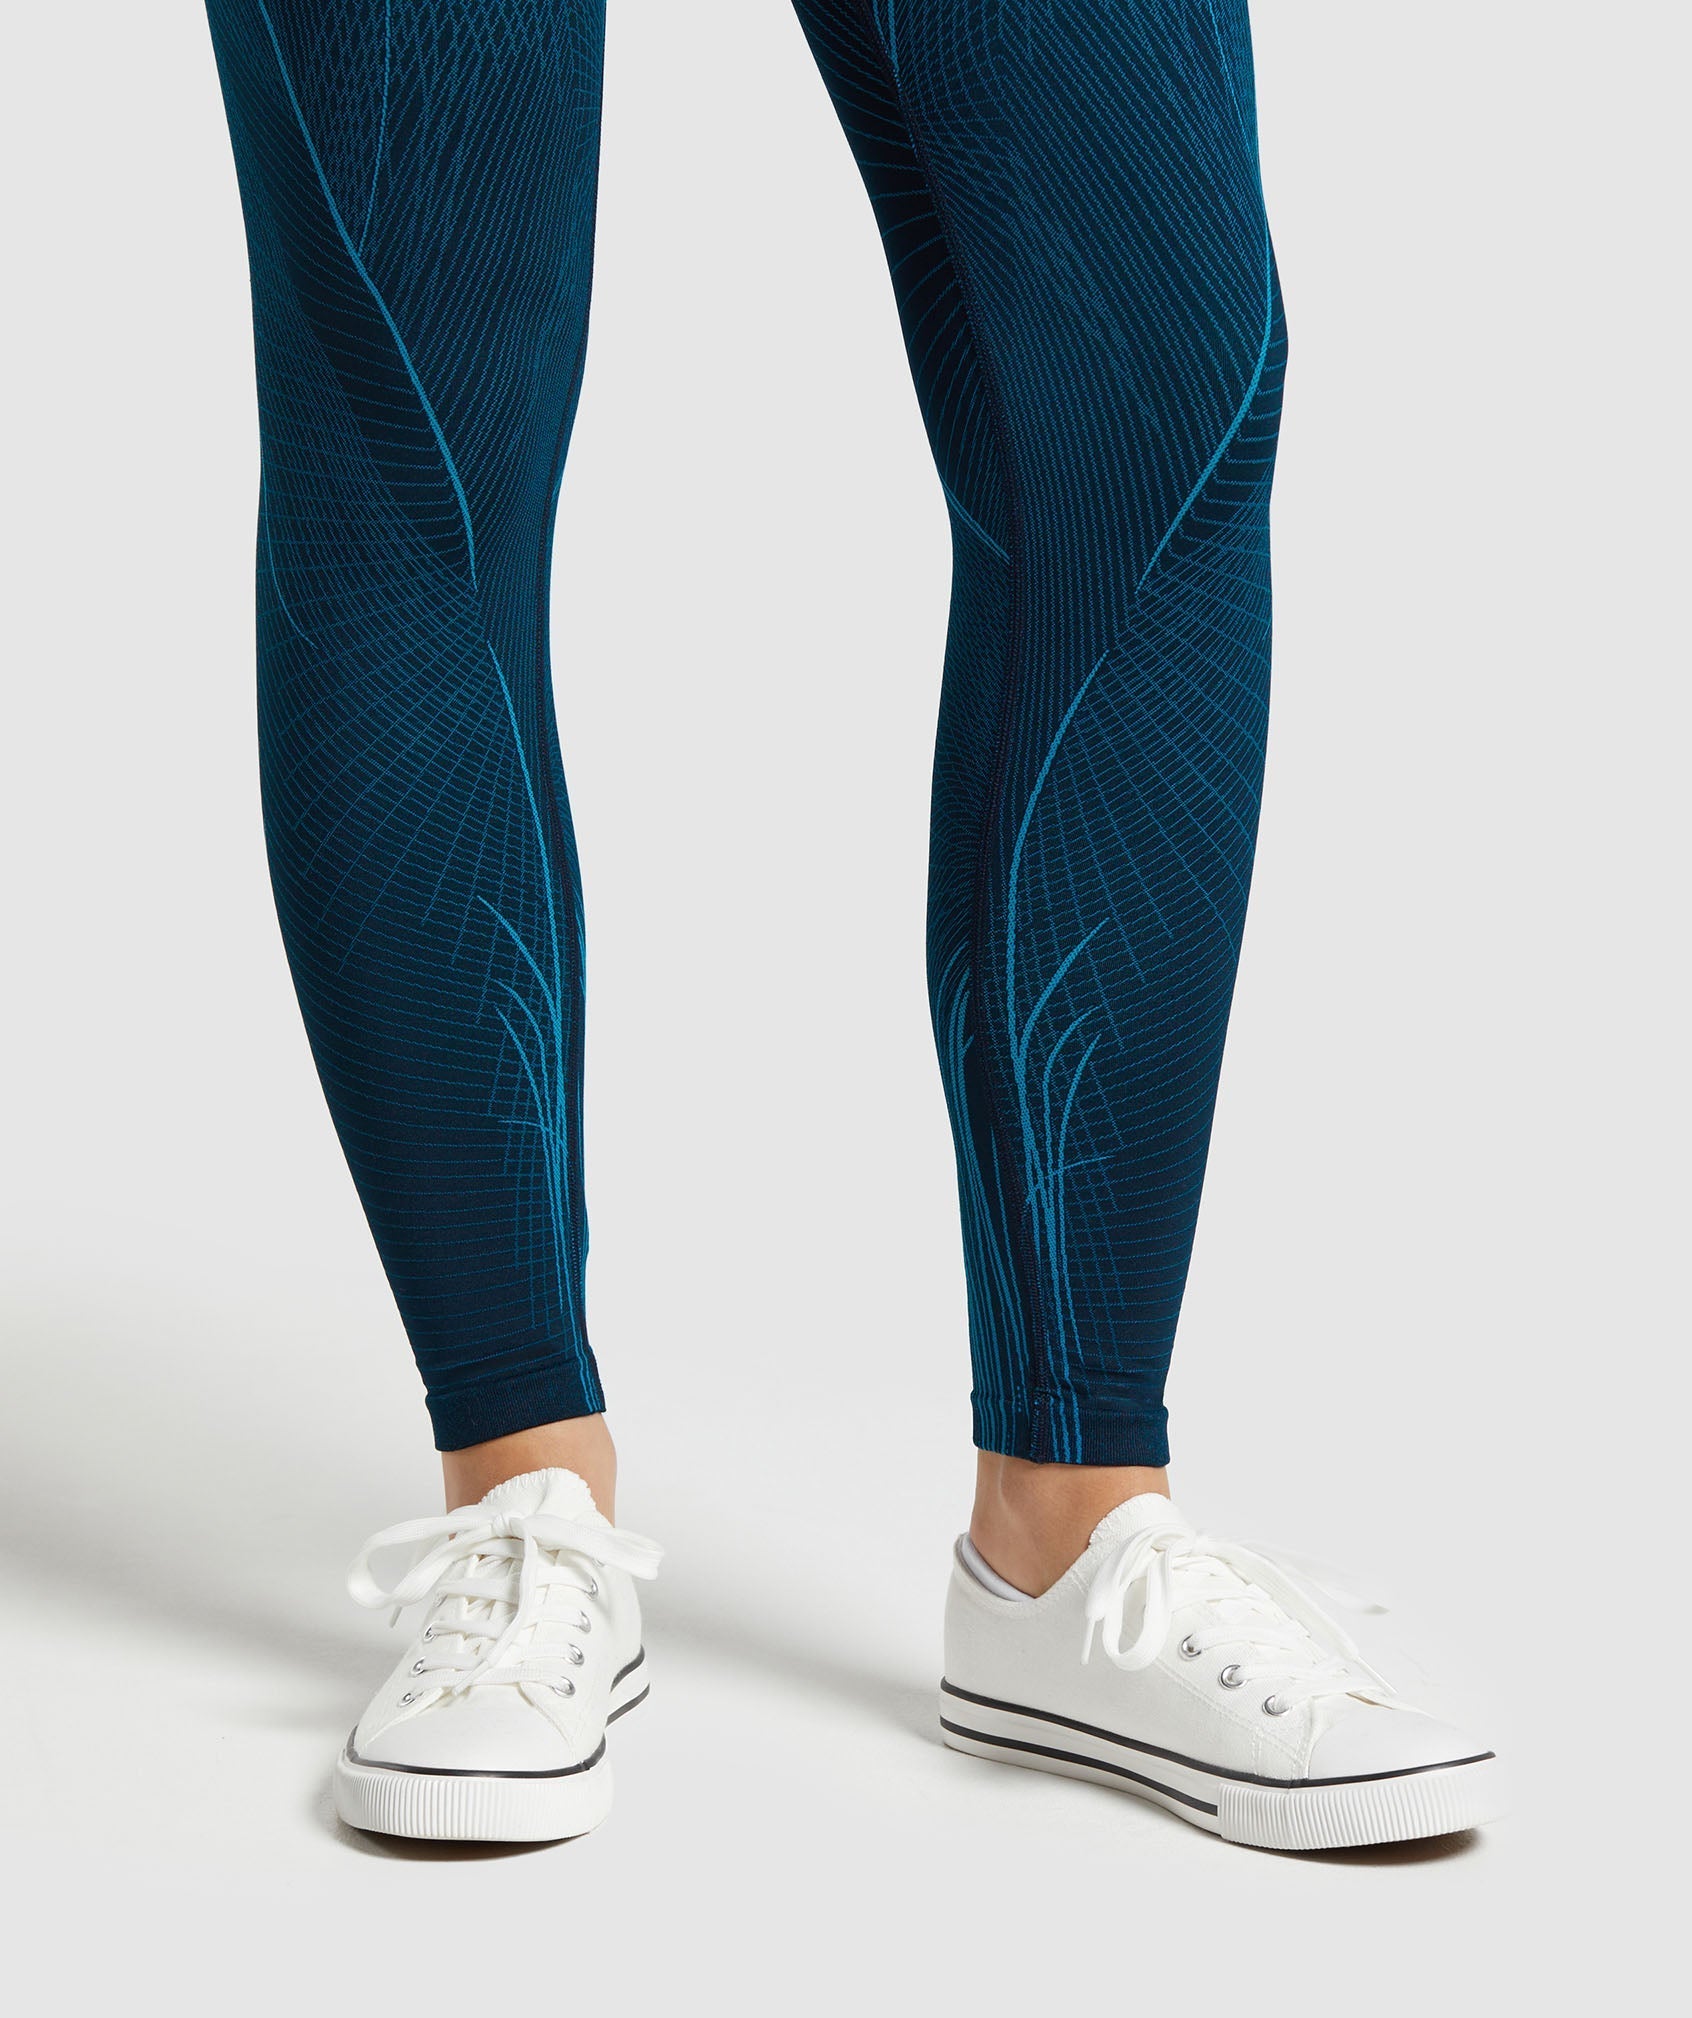 GS x Analis Leggings in Midnight Blue/Lats Blue - view 8